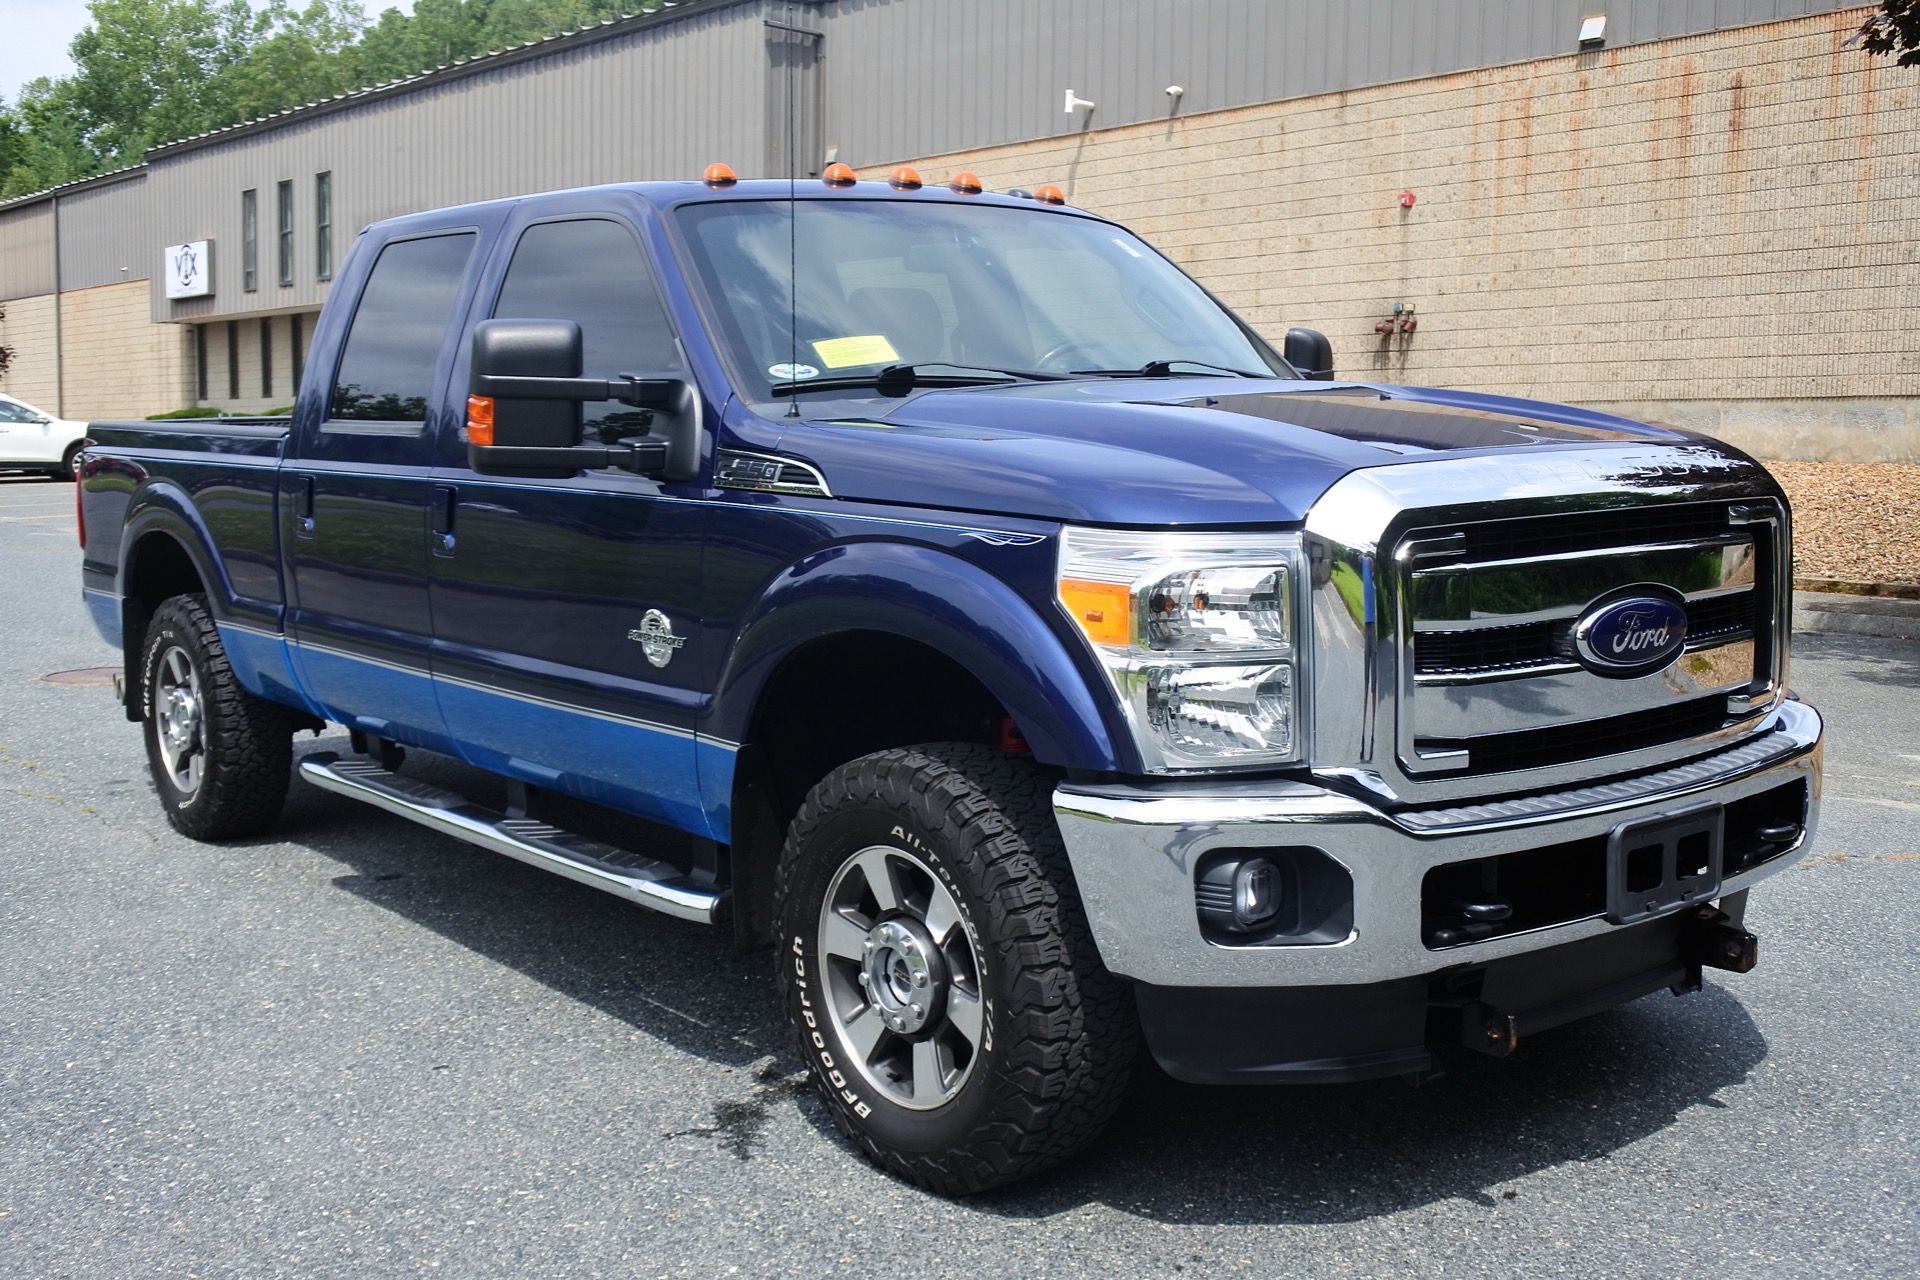 Used 2012 Ford Super Duty F-250 Srw 4WD Crew Cab 156' Lariat For Sale